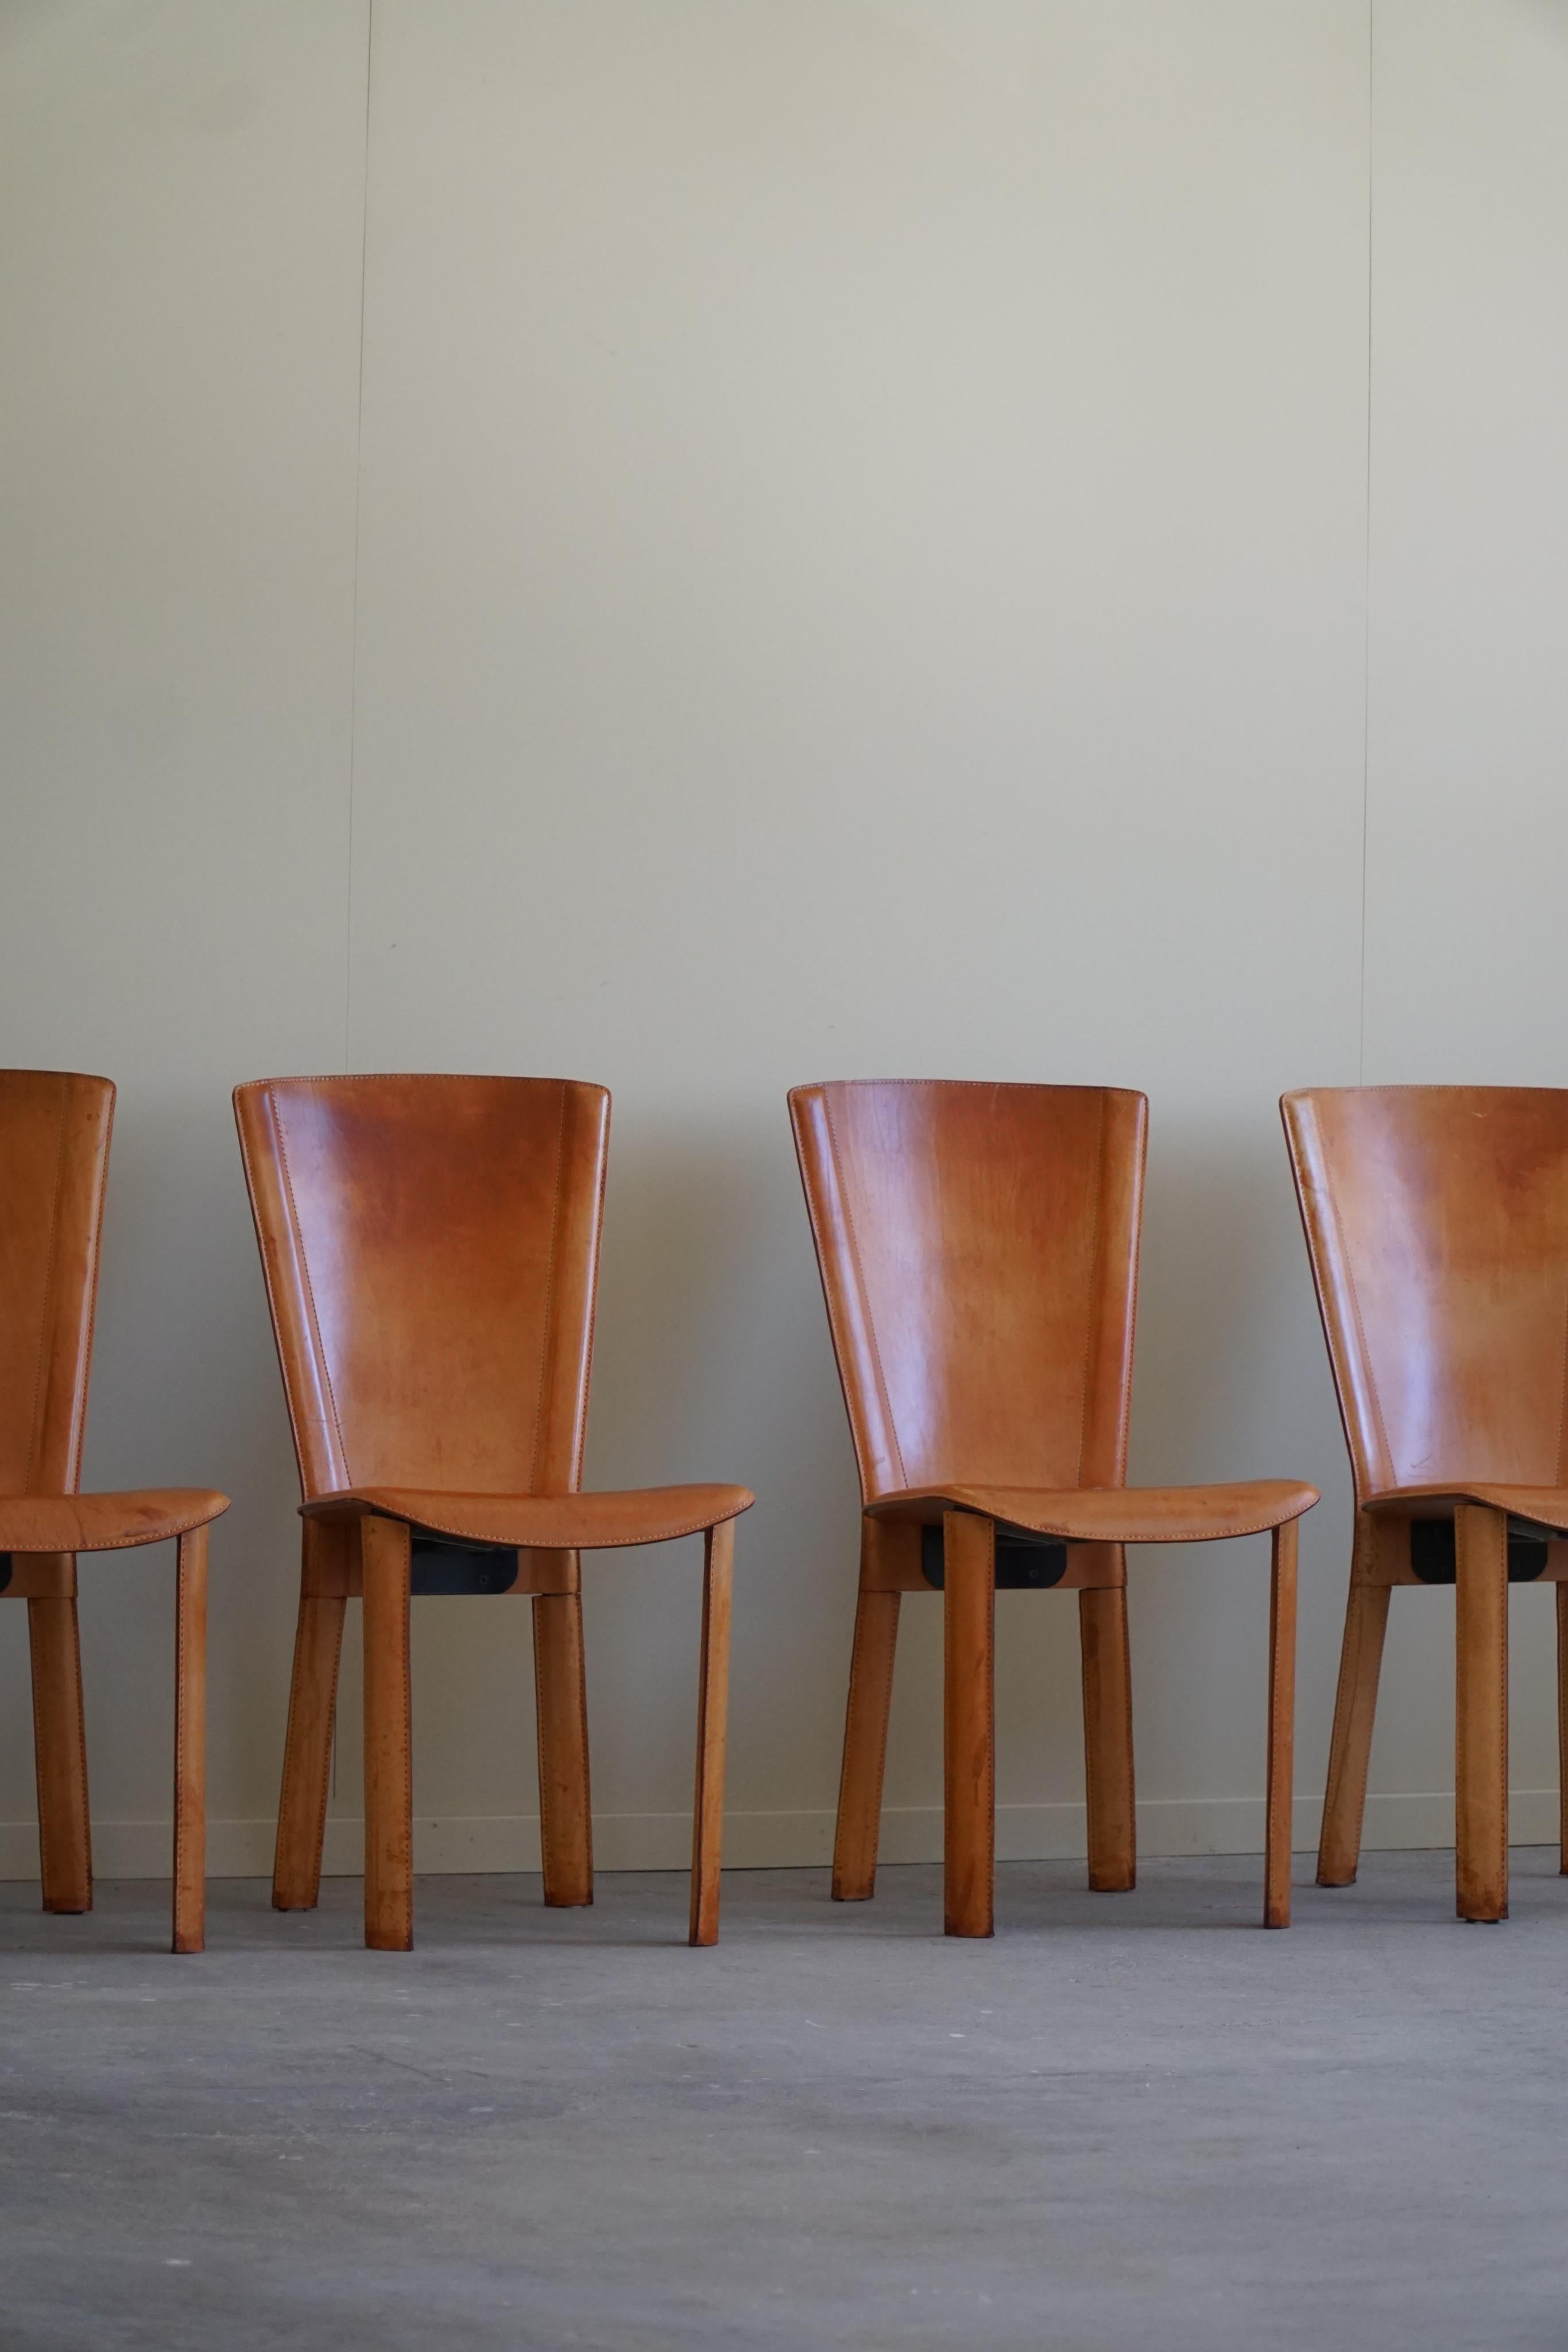 An amazing set of 4 dining chairs in a deep cognac colored leather. Made in Italy, attributed to the Italian architect Mario Bellini. Made in the 1970-1980s. 

Such beautiful lines and a warm patina that complement the overall impression of this